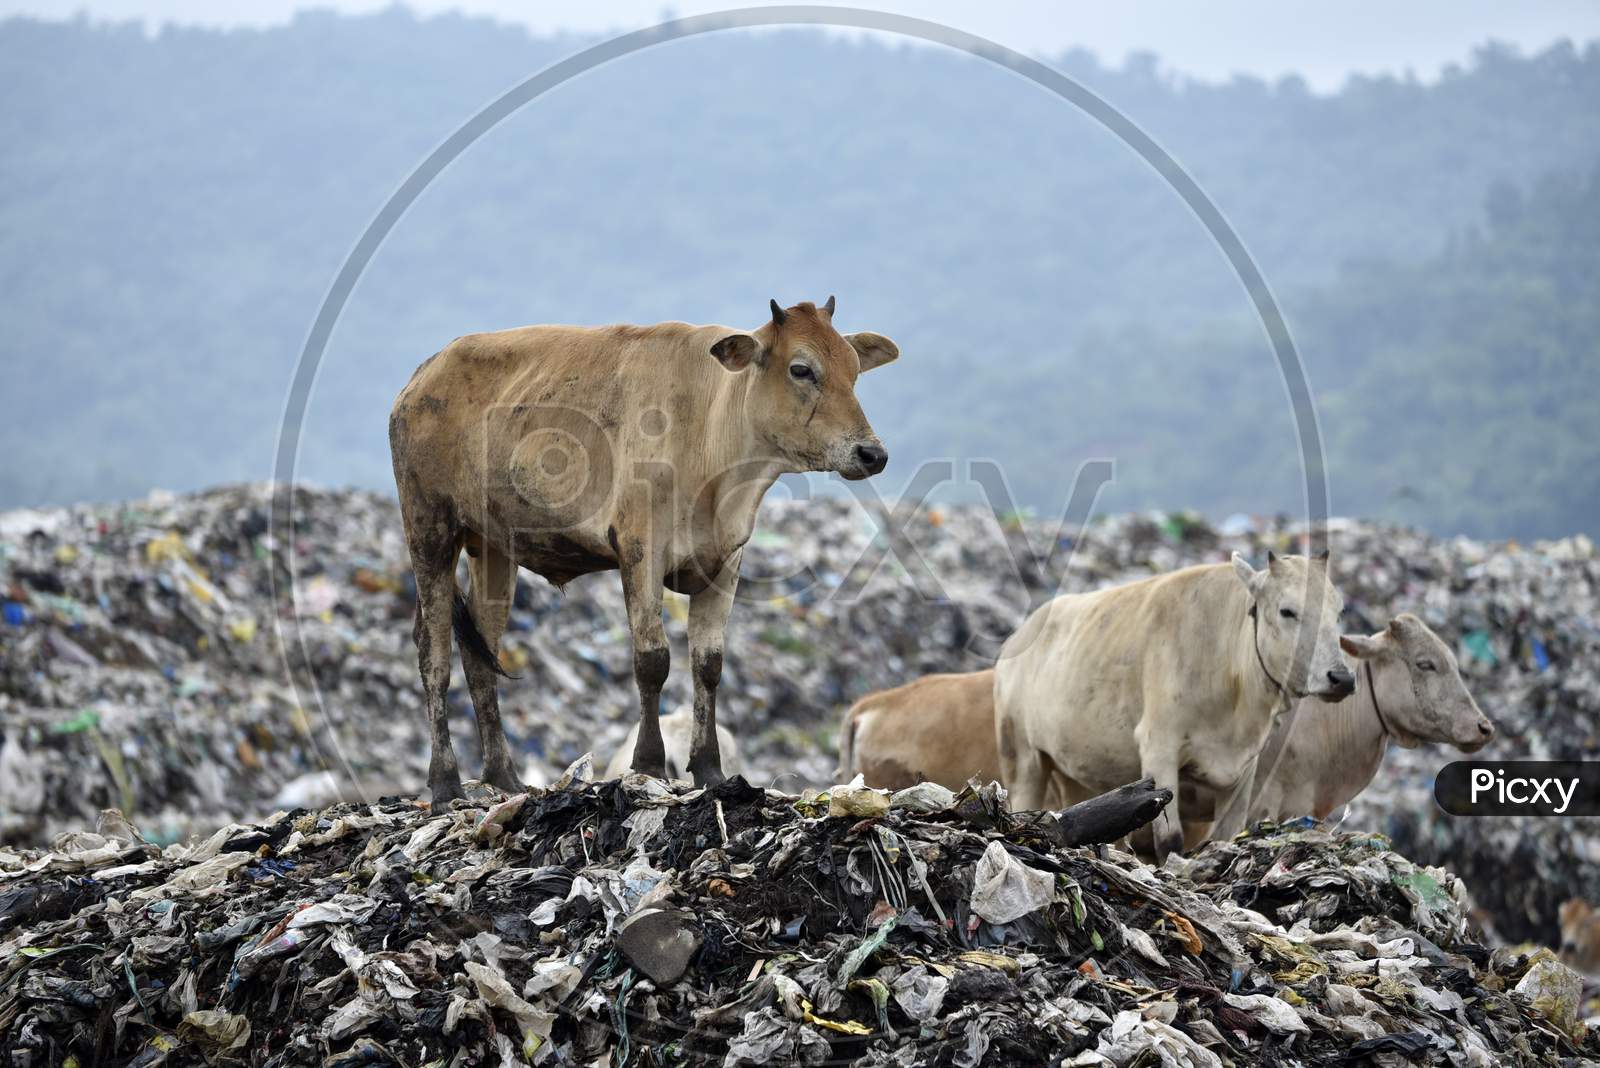 Cows Eating Trash And Polyethylene Covers In Dumping Yard in Guwahati